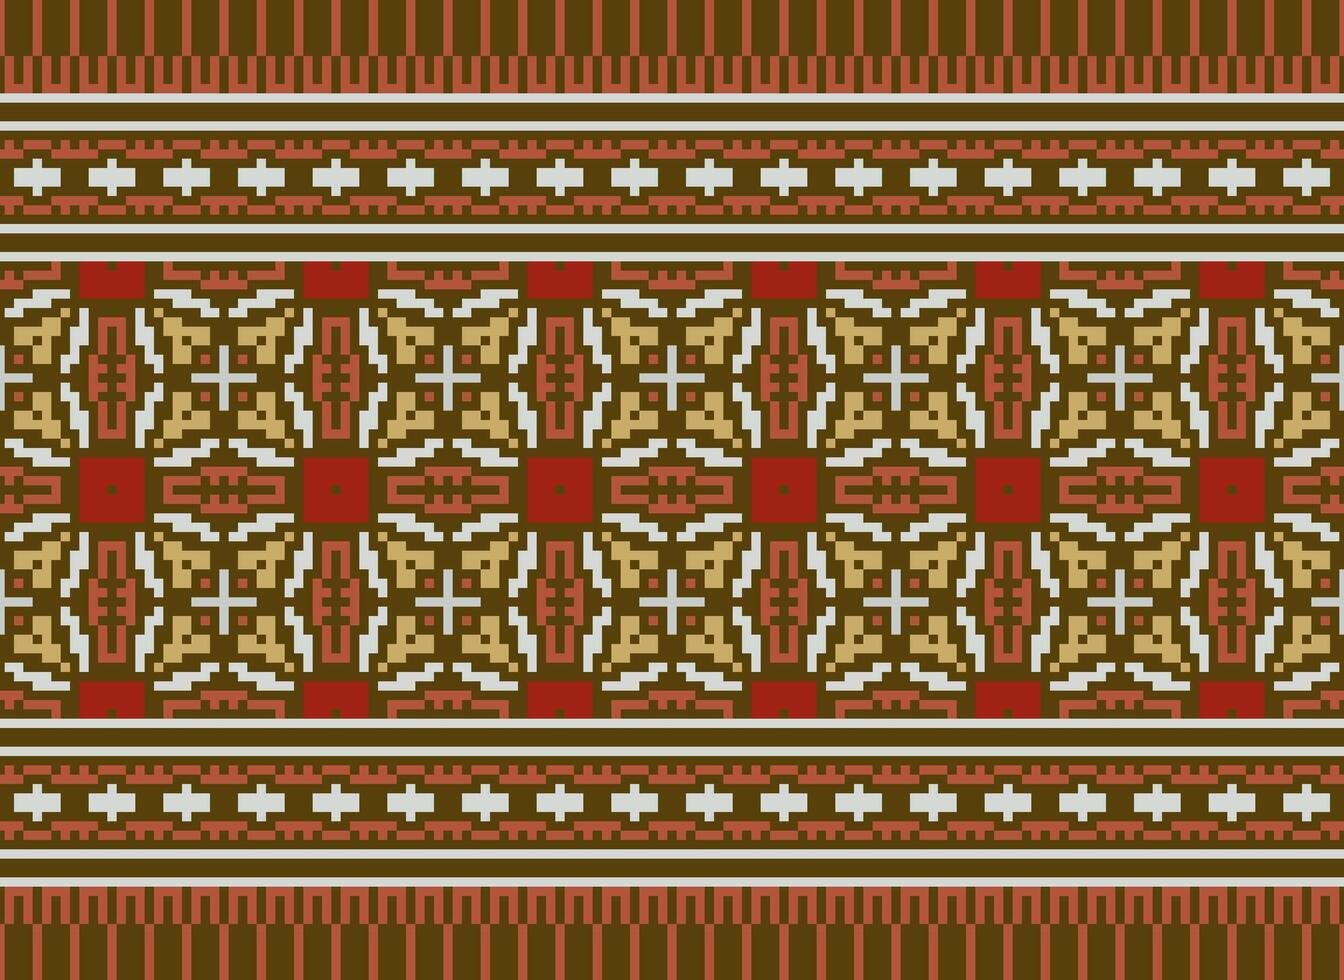 Pixel Cross Stitch pattern with Floral Designs. Traditional cross stitch needlework. Geometric Ethnic pattern, Embroidery, Textile ornamentation, fabric, Hand stitched pattern, Cultural stitching vector